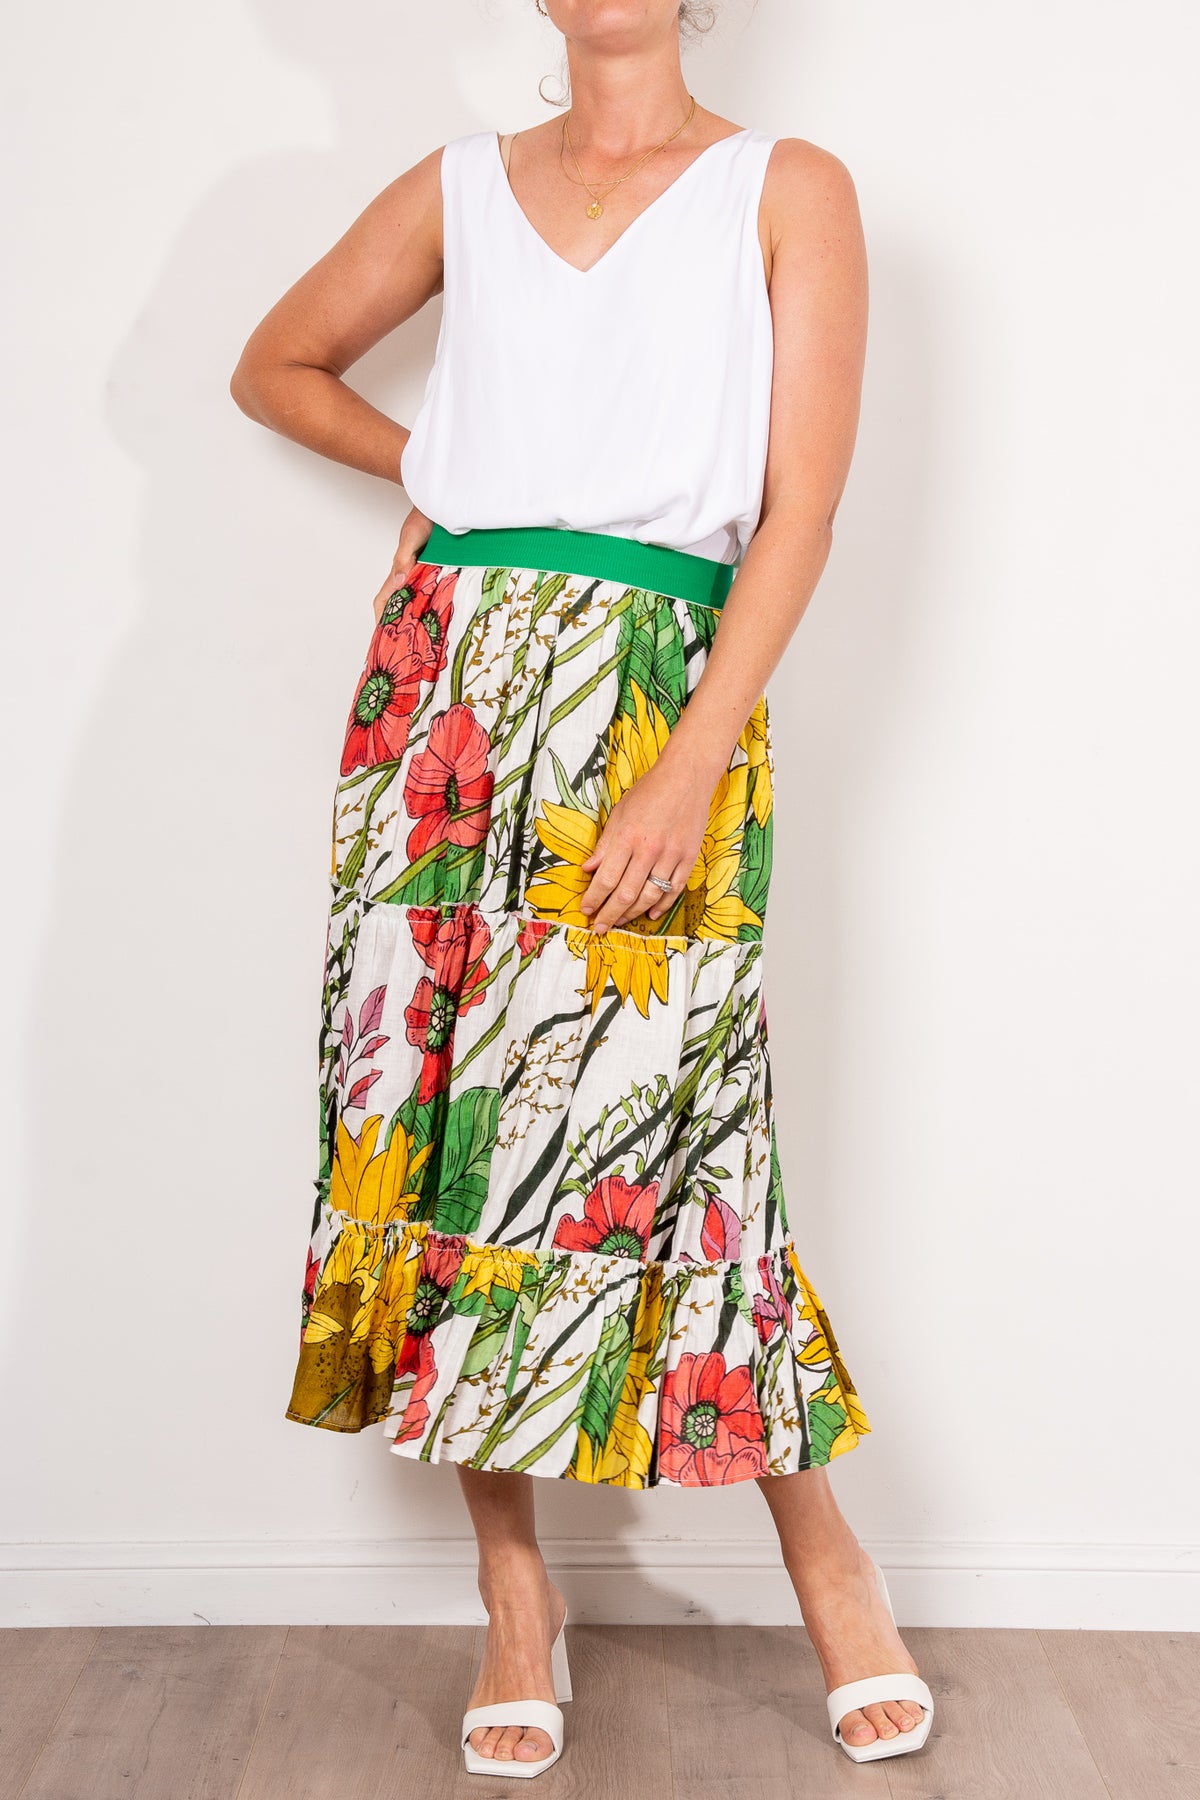 CURATE by Trelise Cooper Lawn Party Sunflower Power Skirt